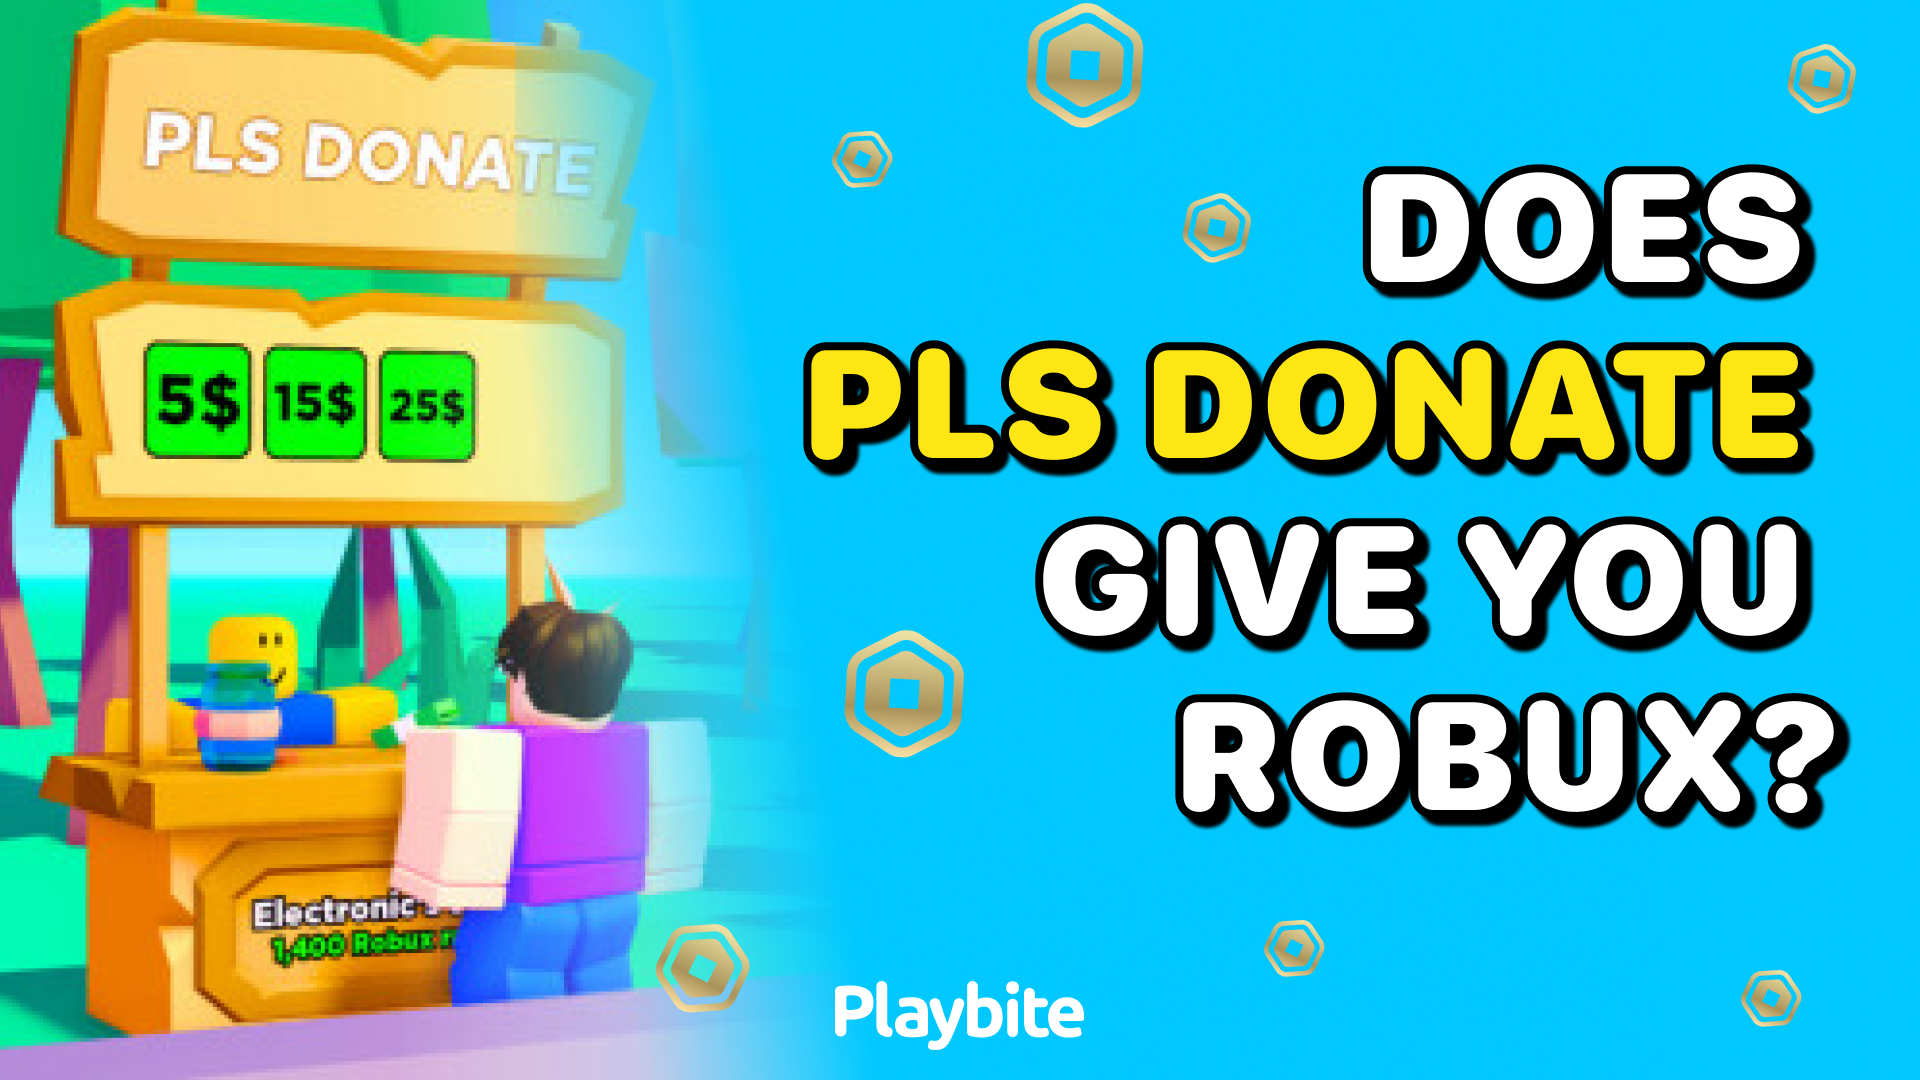 Does PLS DONATE Give You Robux?